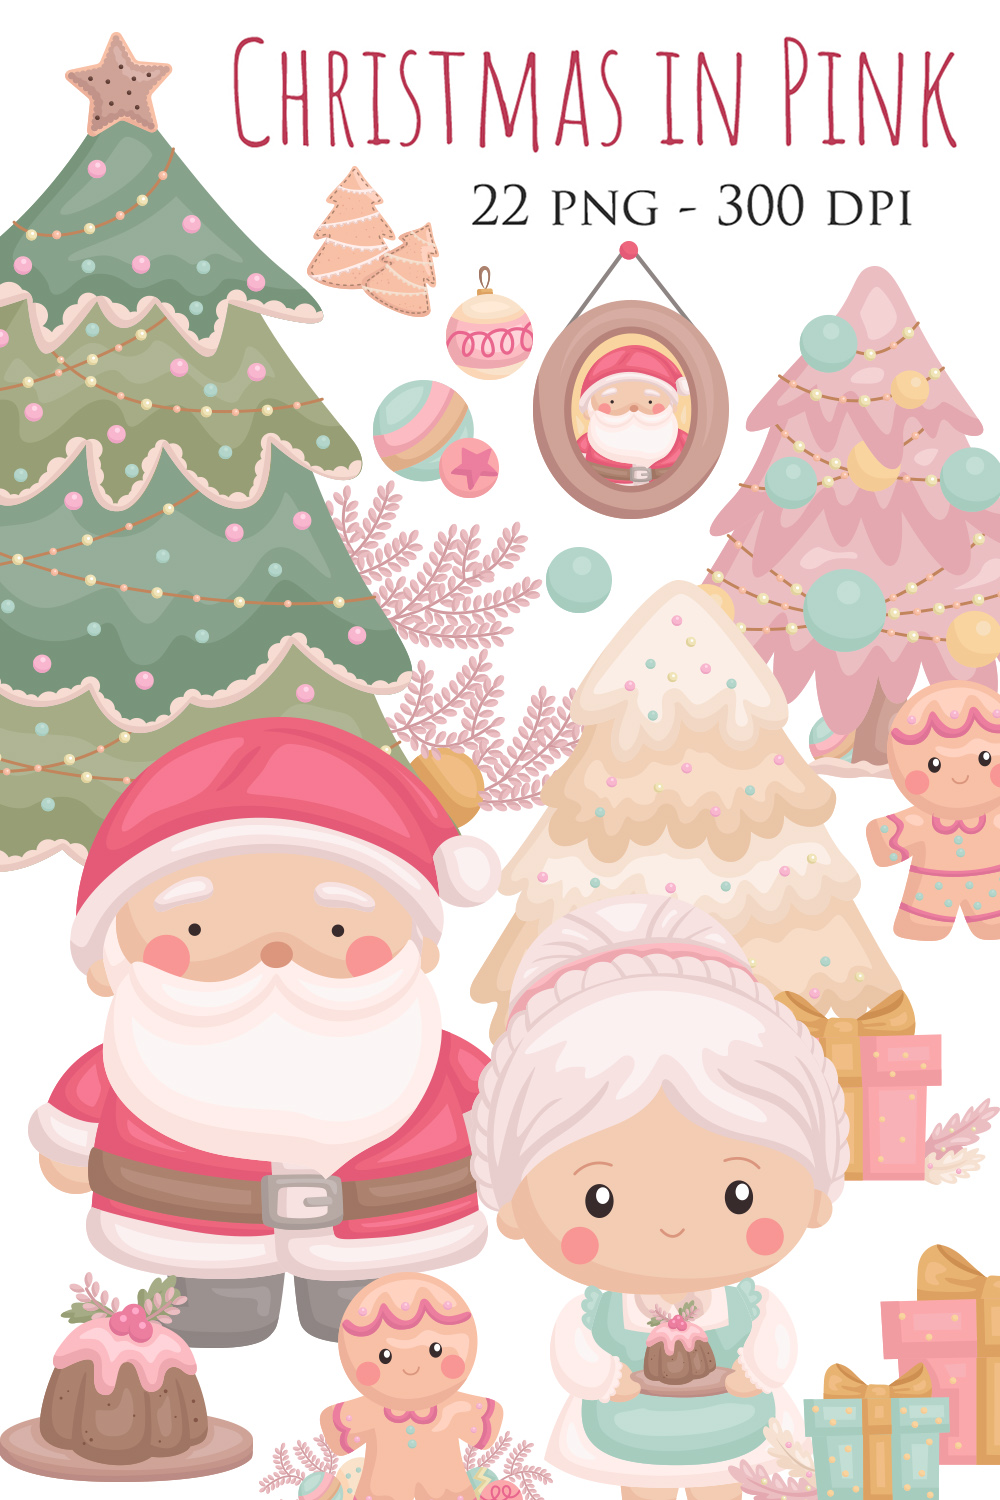 Cute Christmas in Pink Decoration Background Ornaments Accessories Tree Santa Claus Gingerbread Grandmother Character Cartoon Illustration Vector Clipart Sticker pinterest preview image.